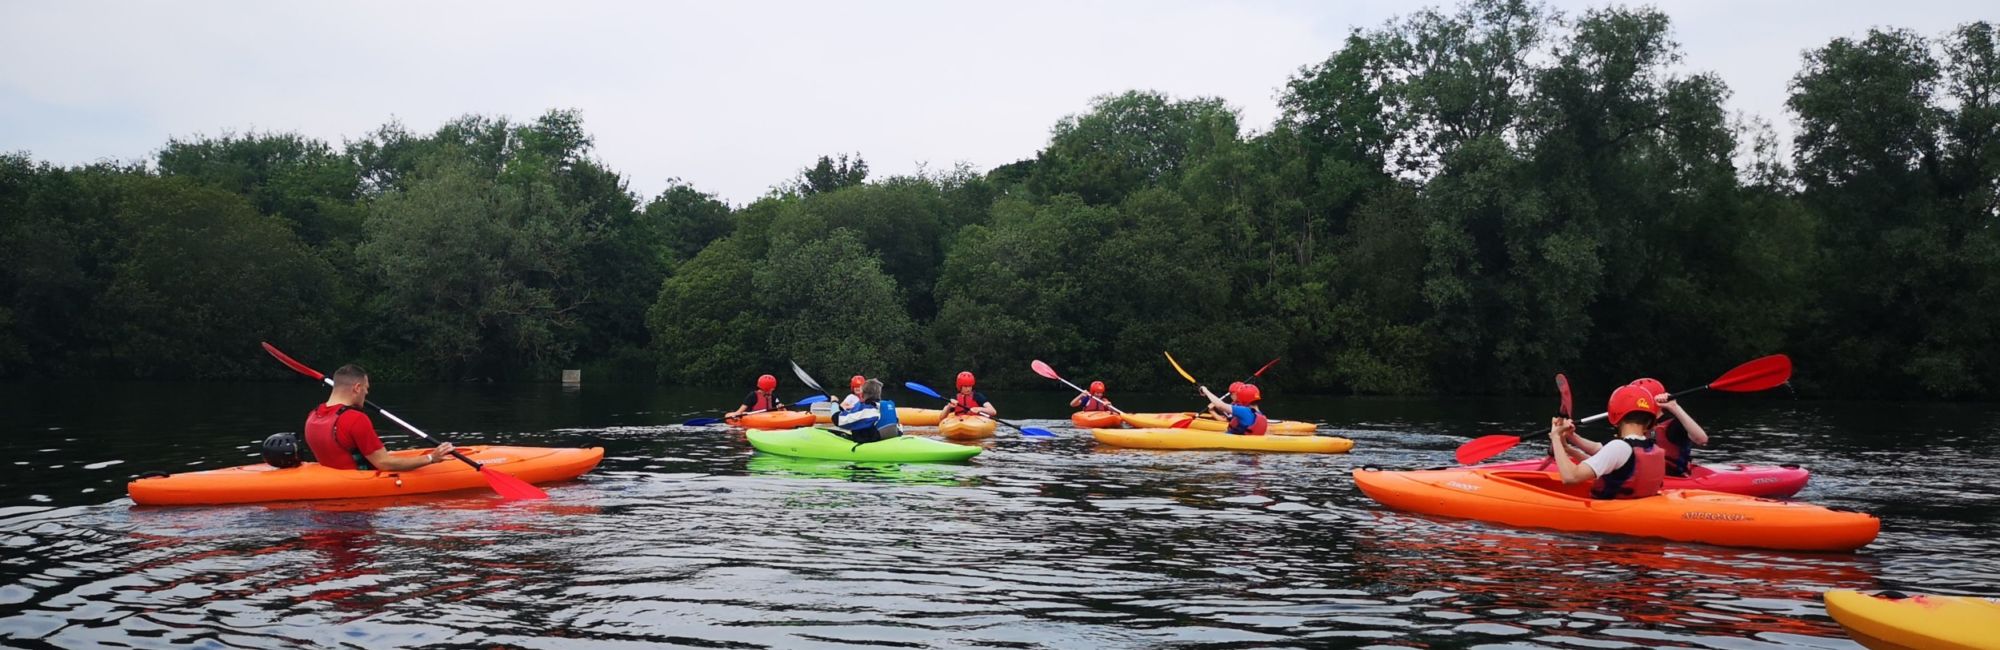 Wycliffe students kayaking